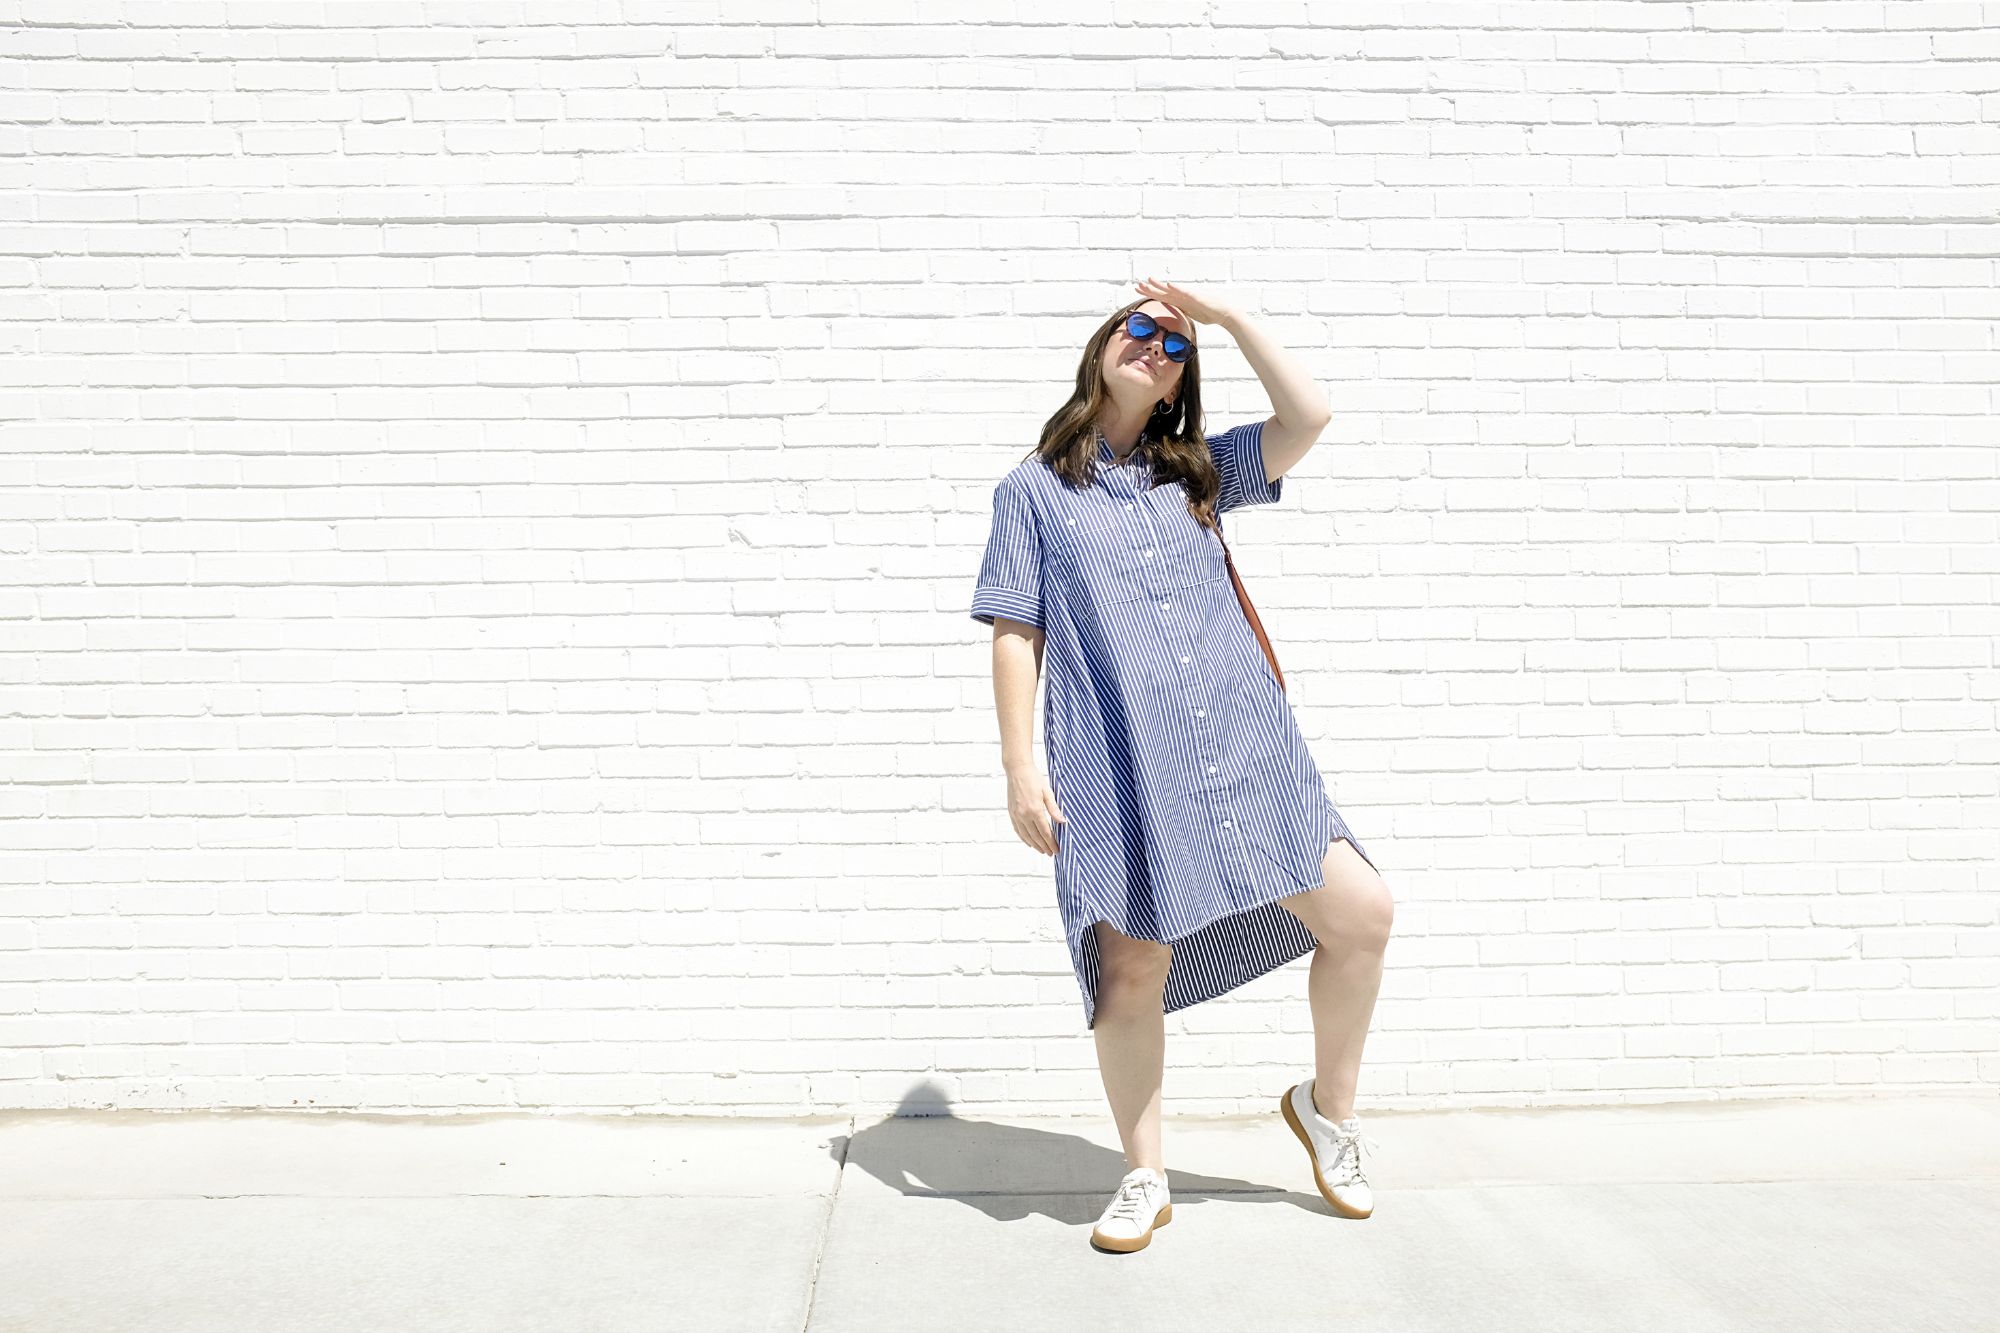 Alyssa wears the daytripper shirtdress and looks to the sun